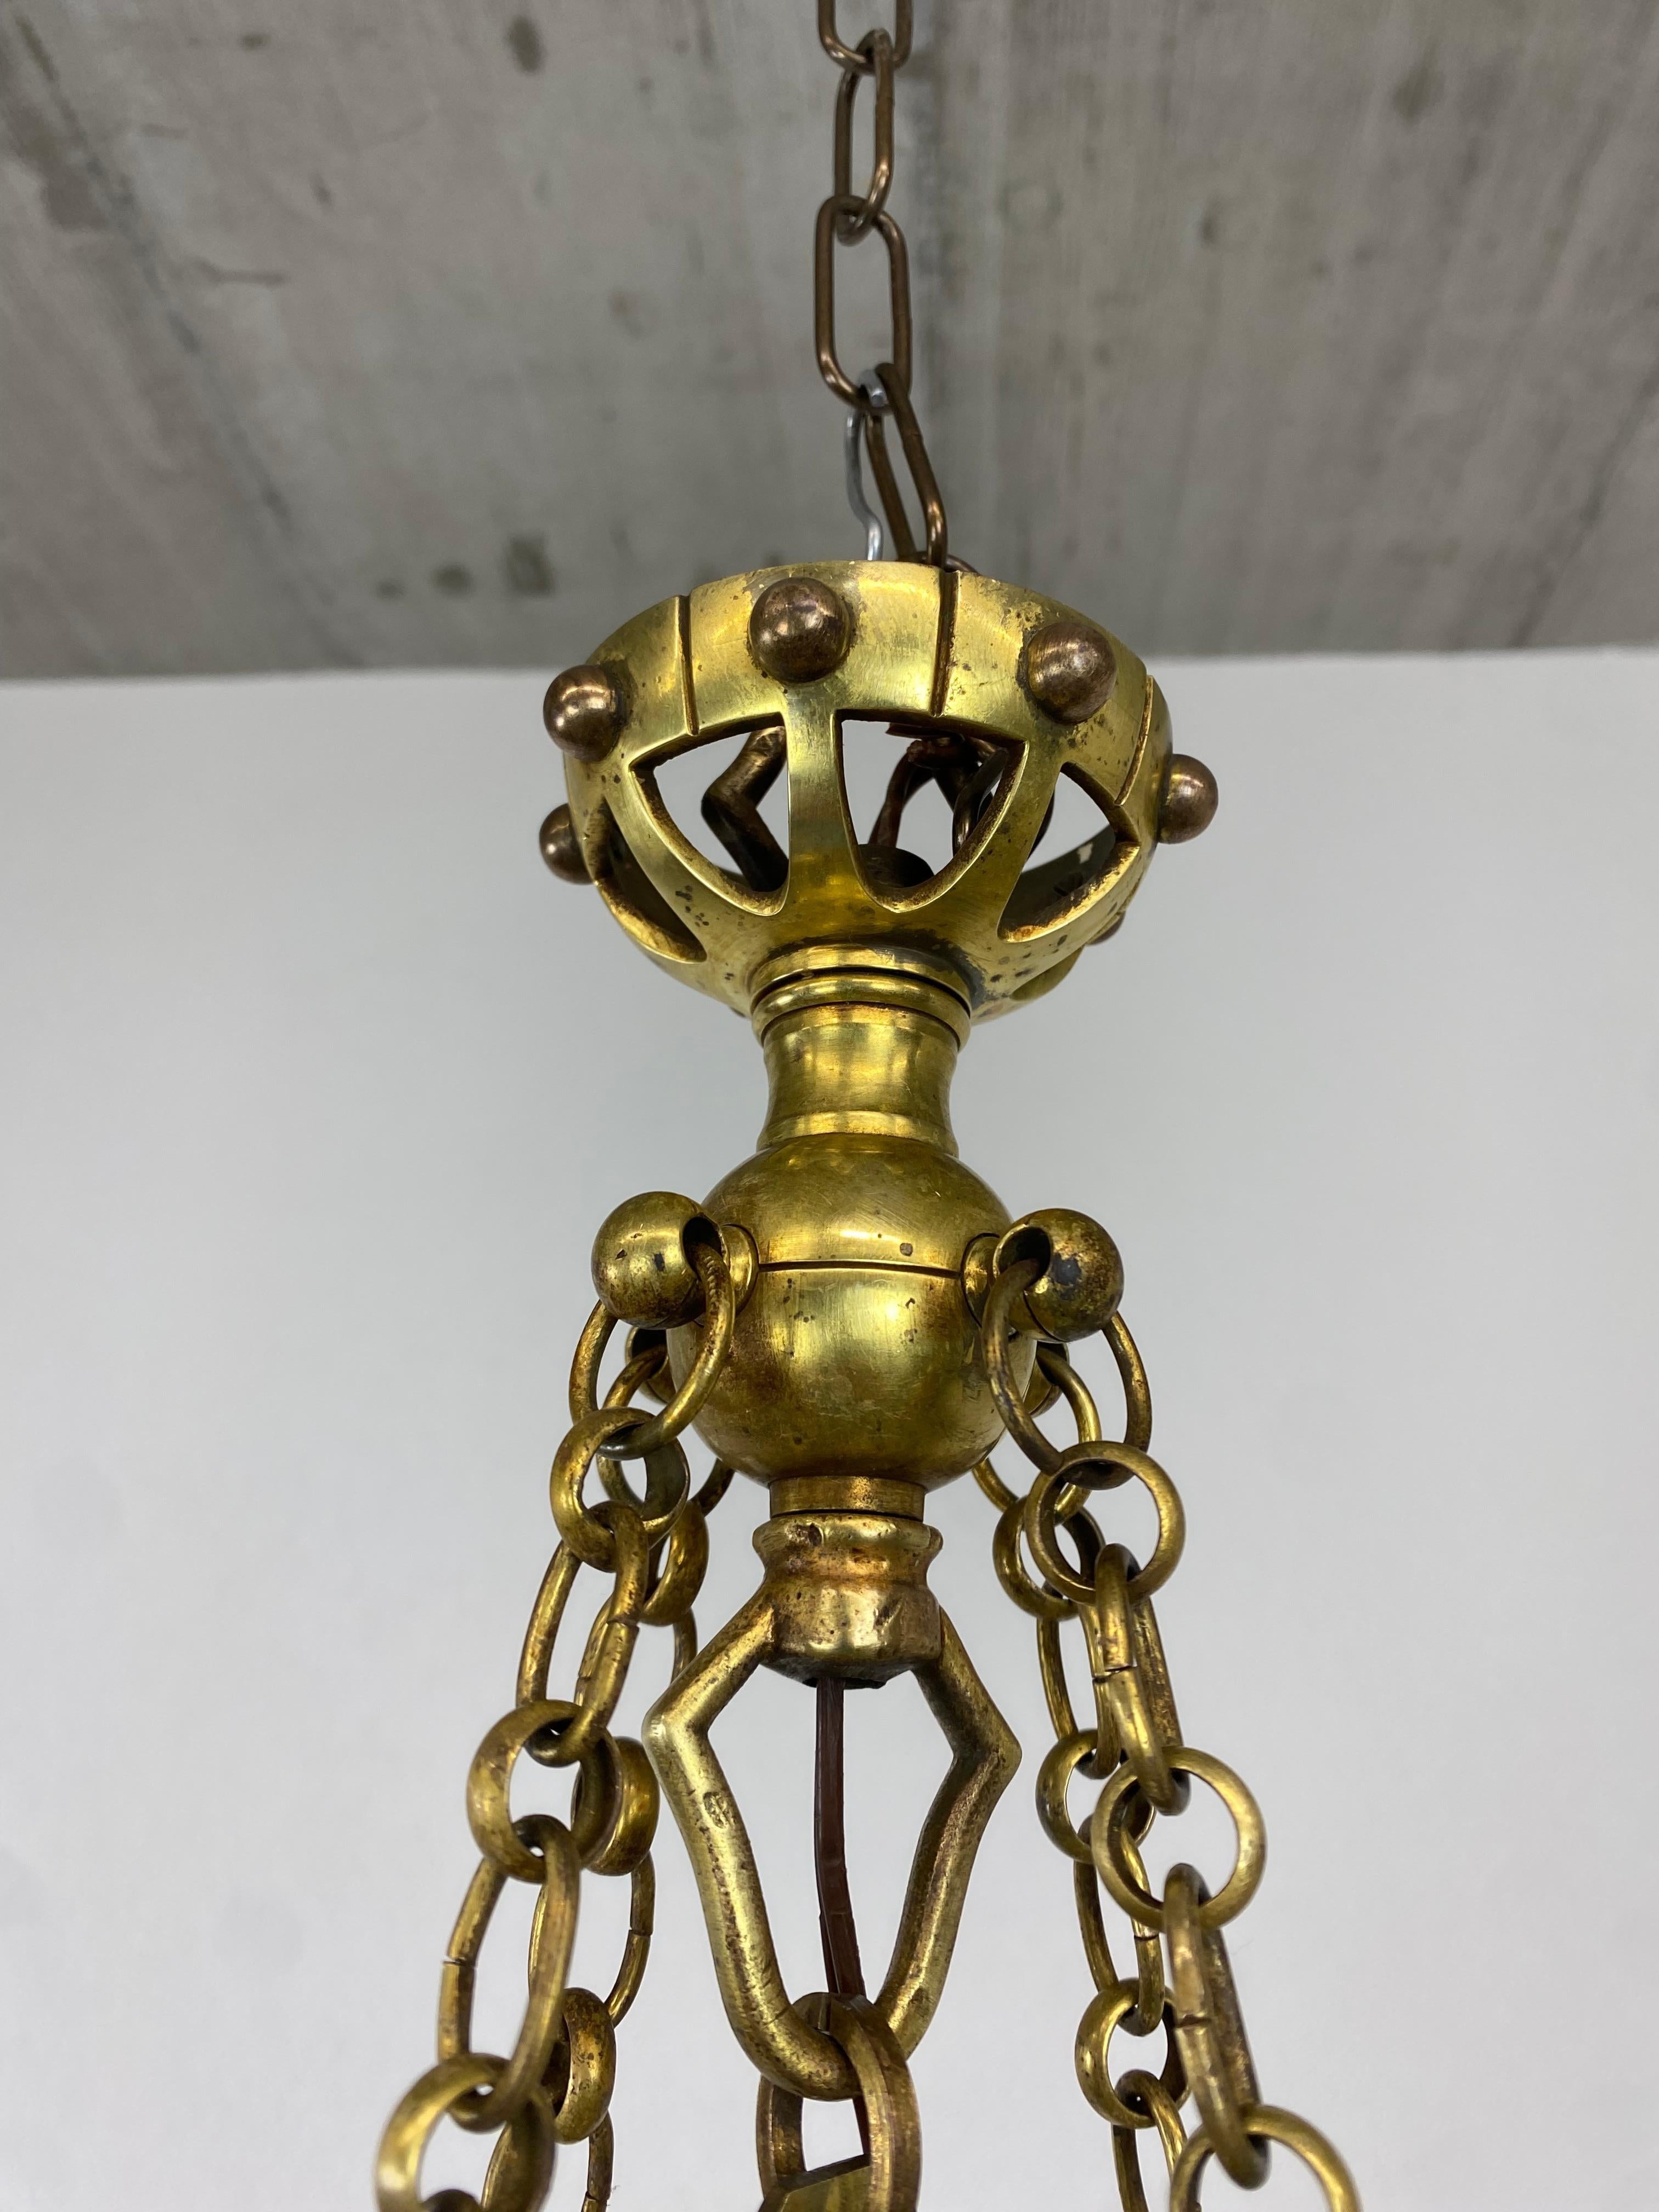 Early 20th Century Vienna Secession Brass Hanging Atr. Kolo Moser For Sale